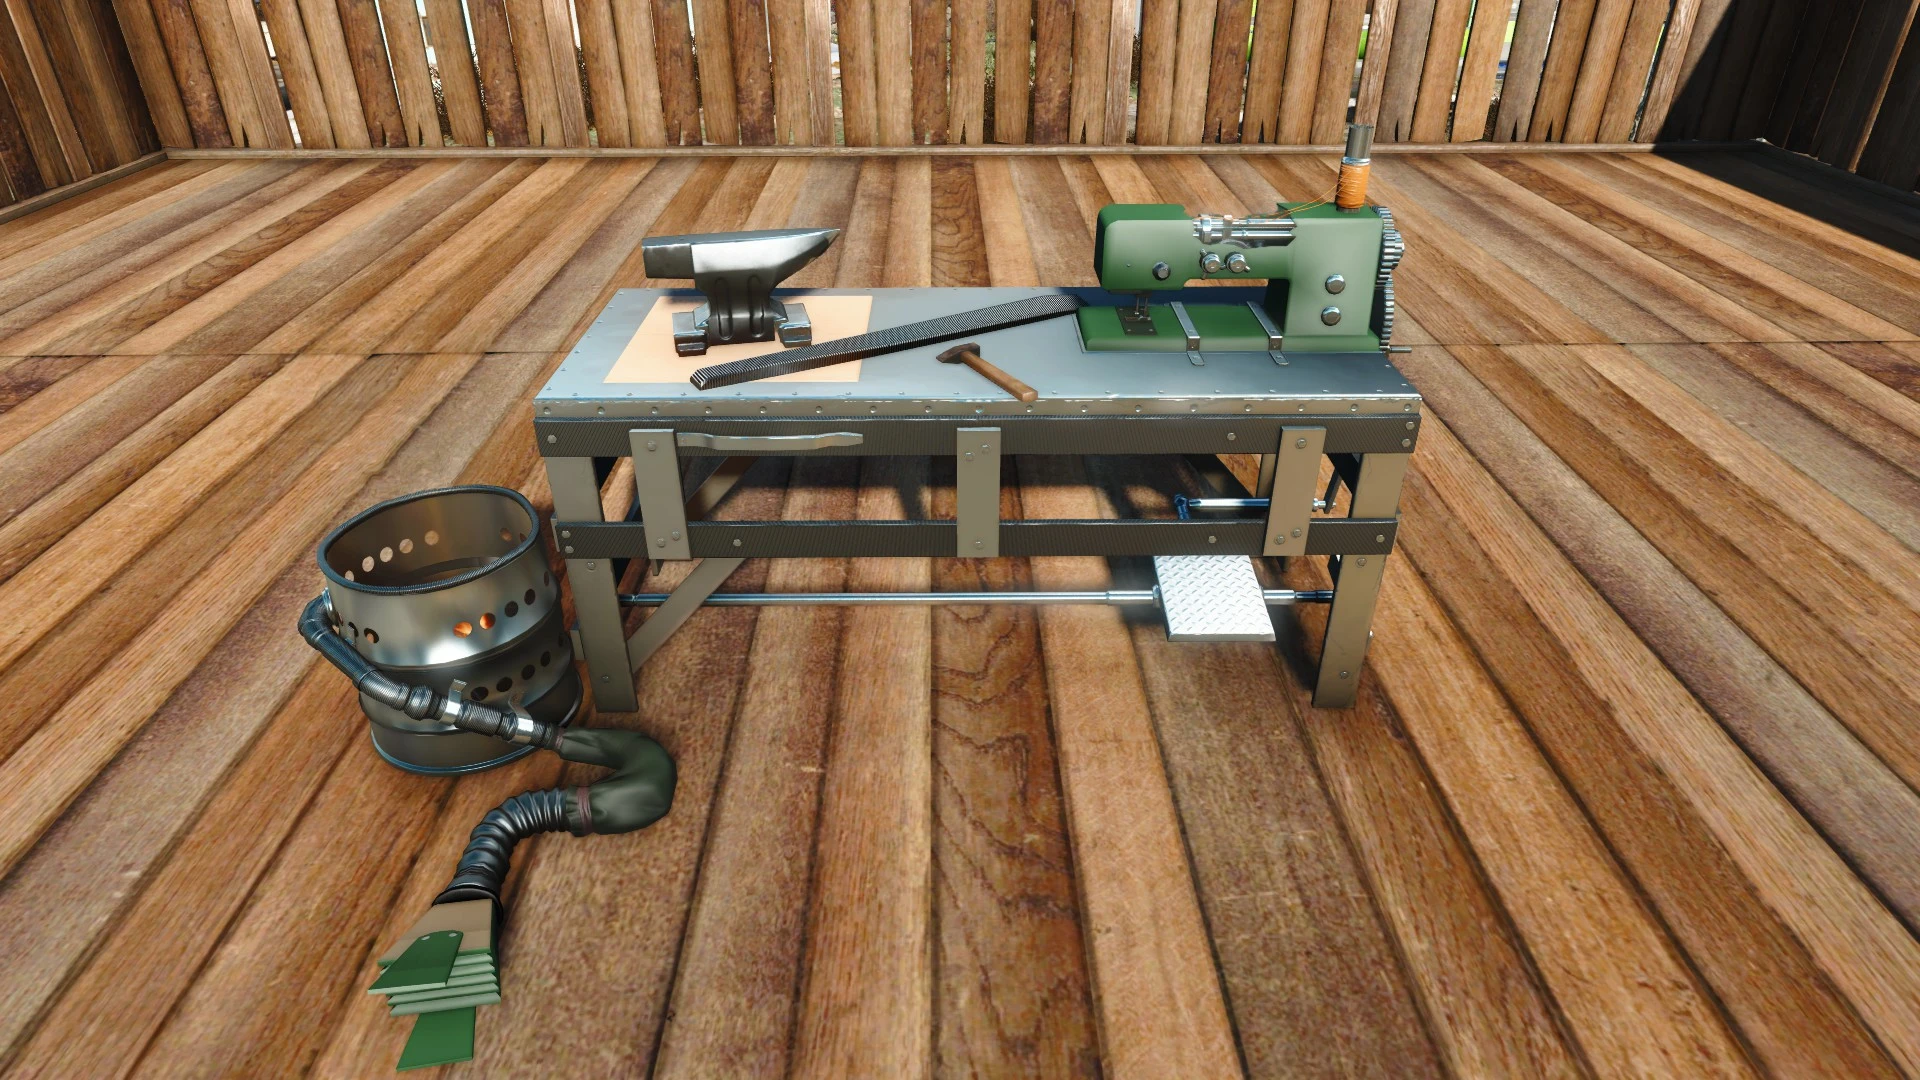 Clean Pre War Workshop Workbenches At Fallout 4 Nexus Mods And Community